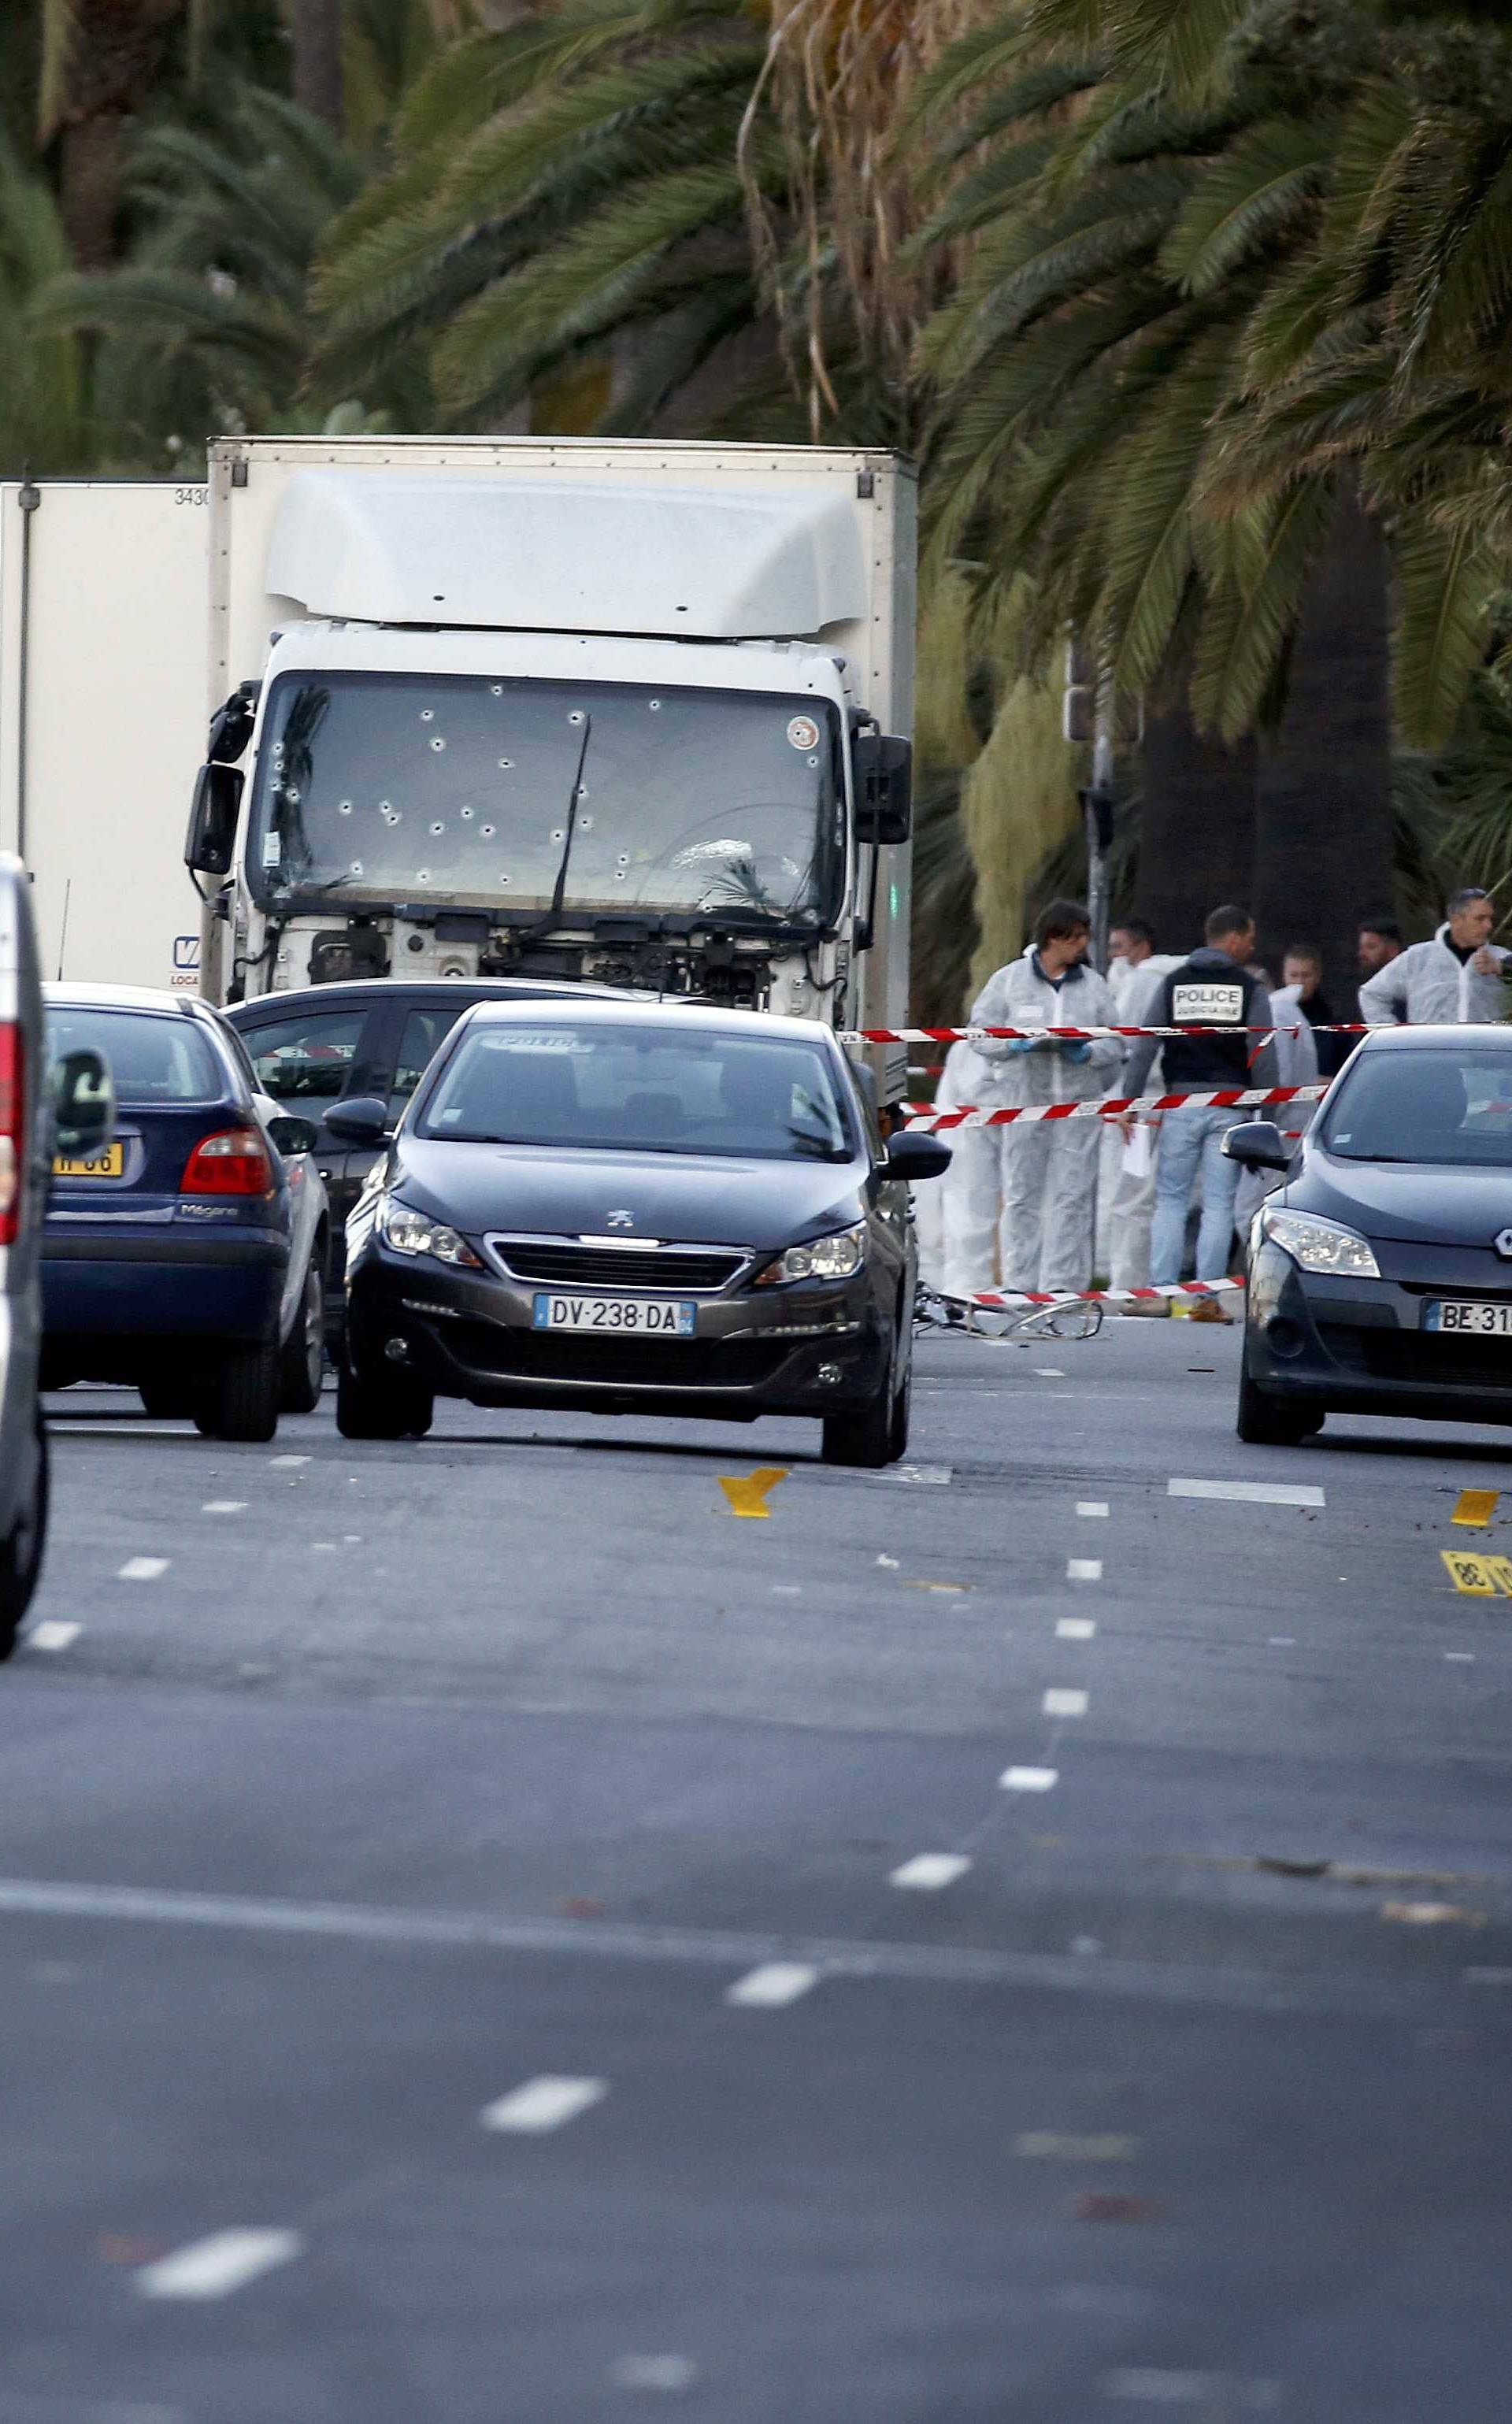 French CRS and judicial police work near the heavy truck that ran into a crowd at high speed celebrating the Bastille Day July 14 national holiday on the Promenade des Anglais killing 80 people in Nice